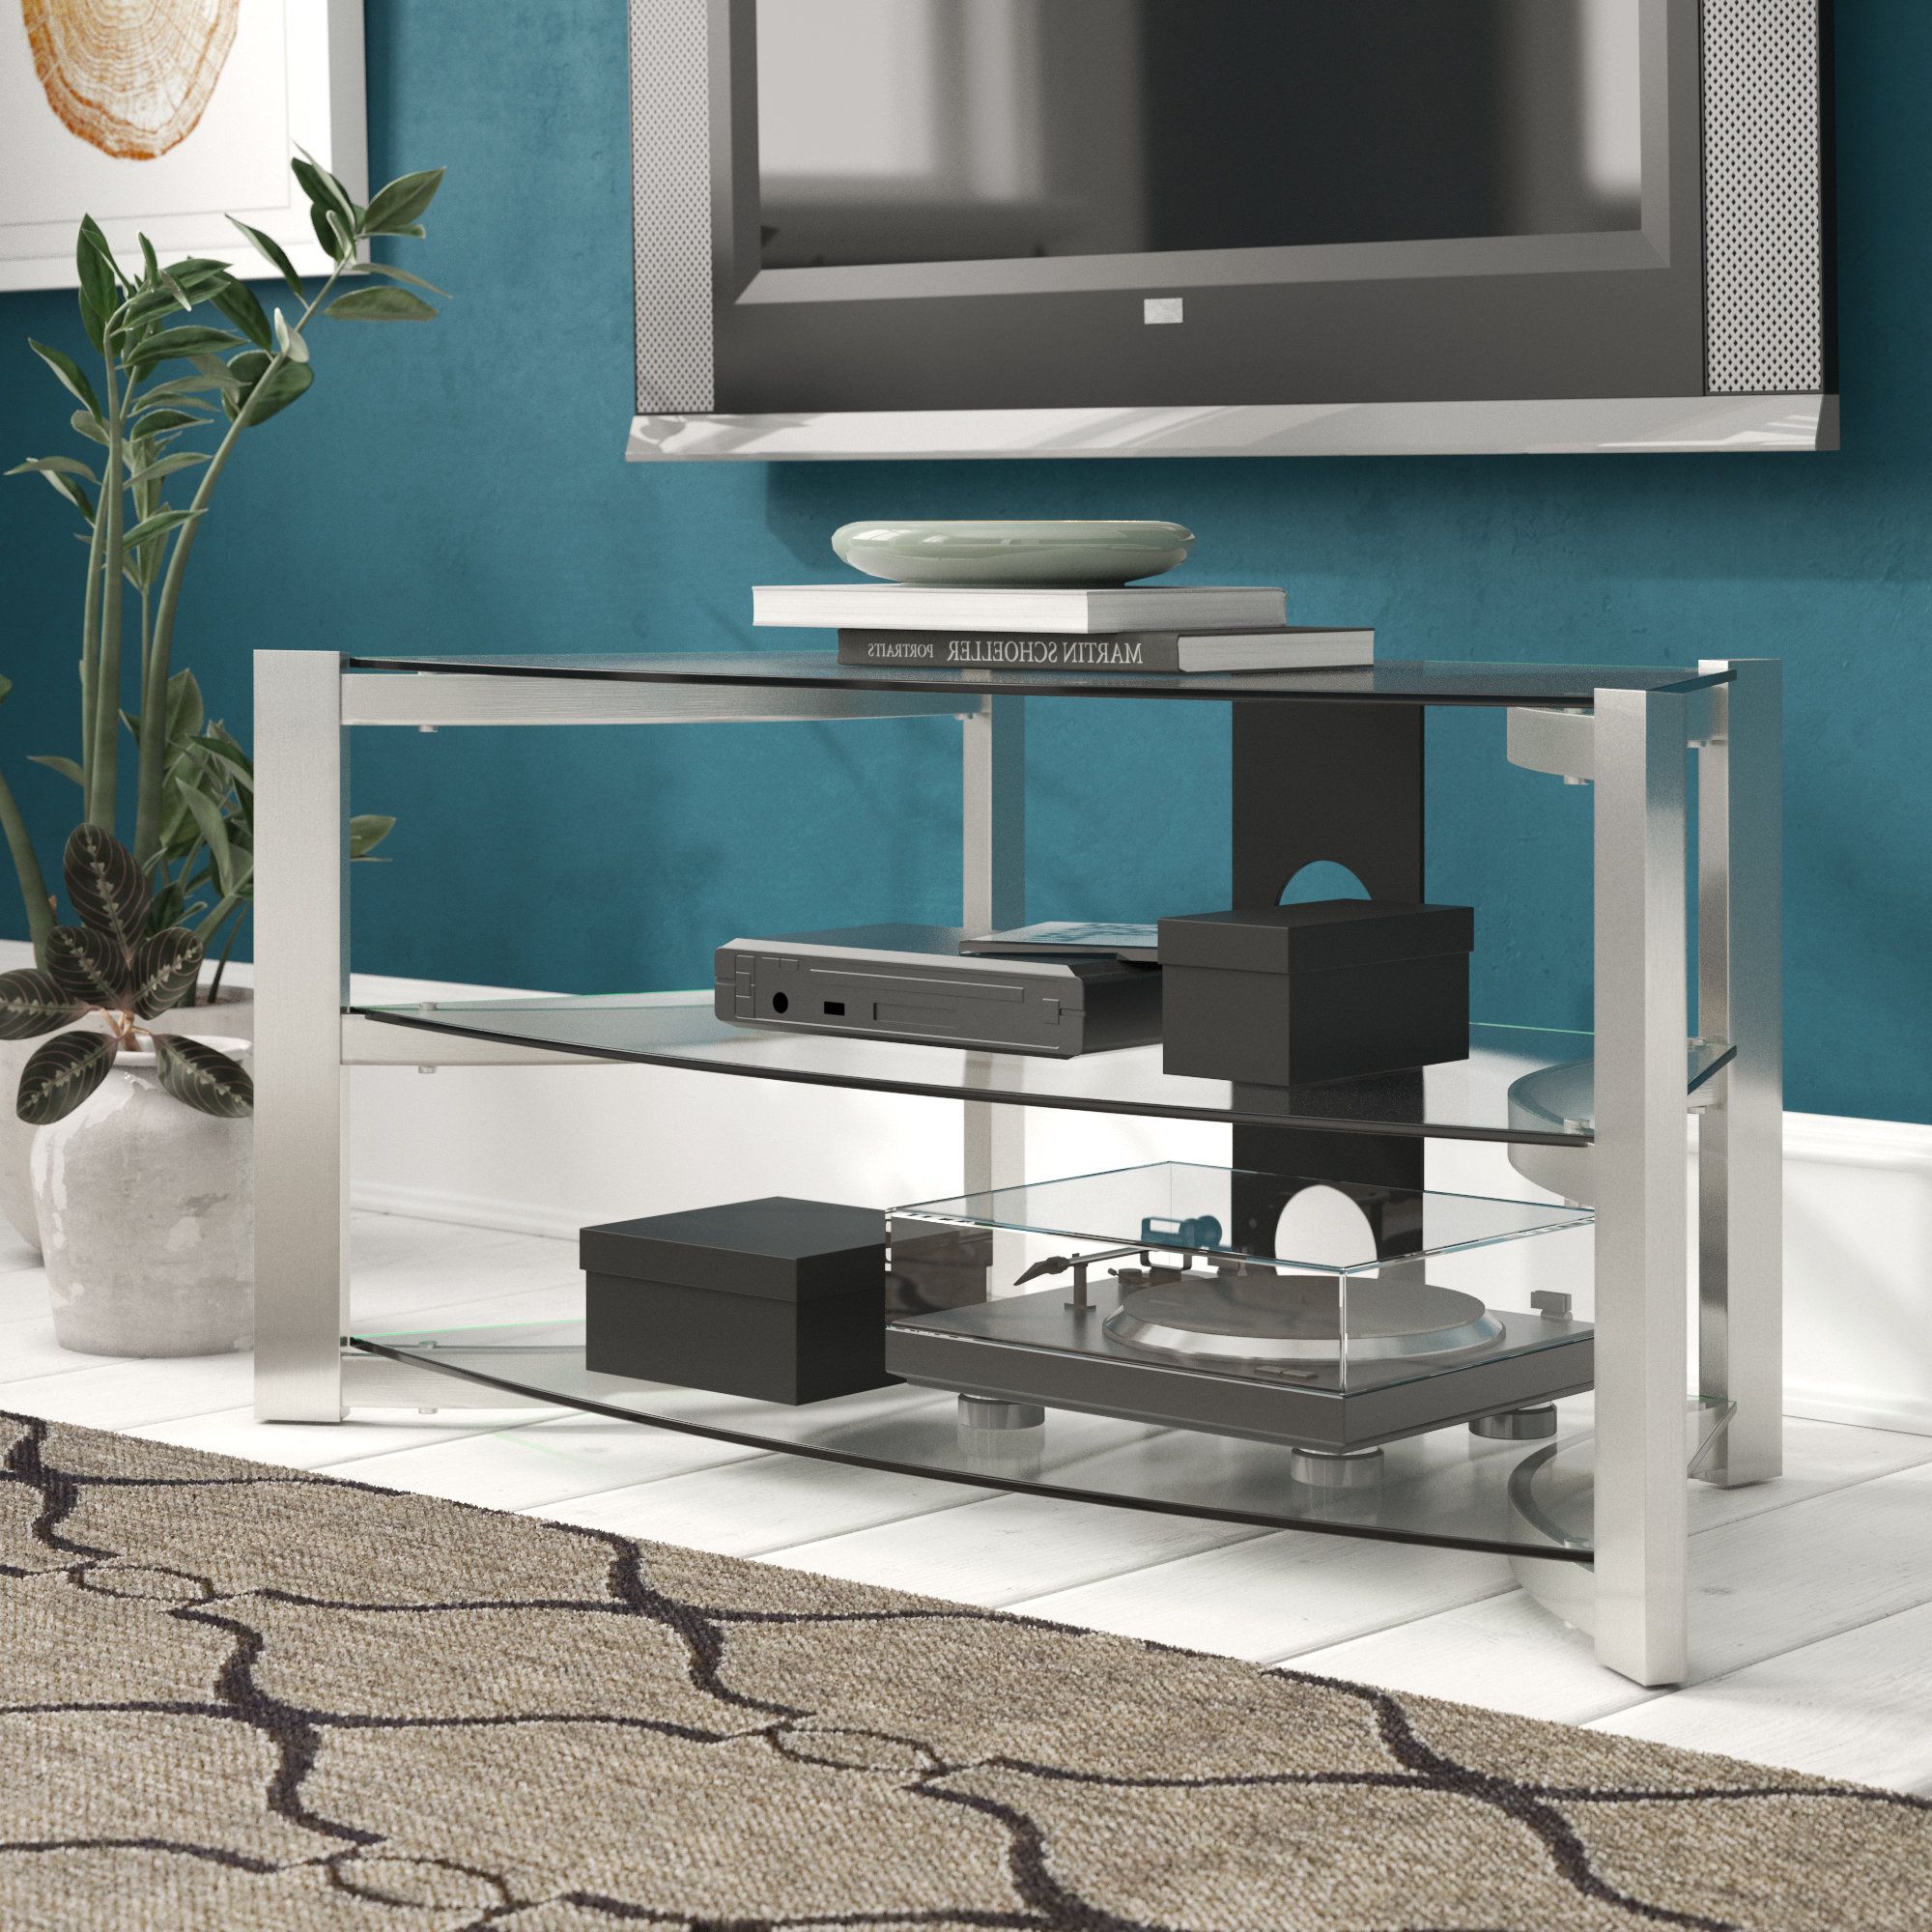 Top 20 of Radiator Cover Tv Stands